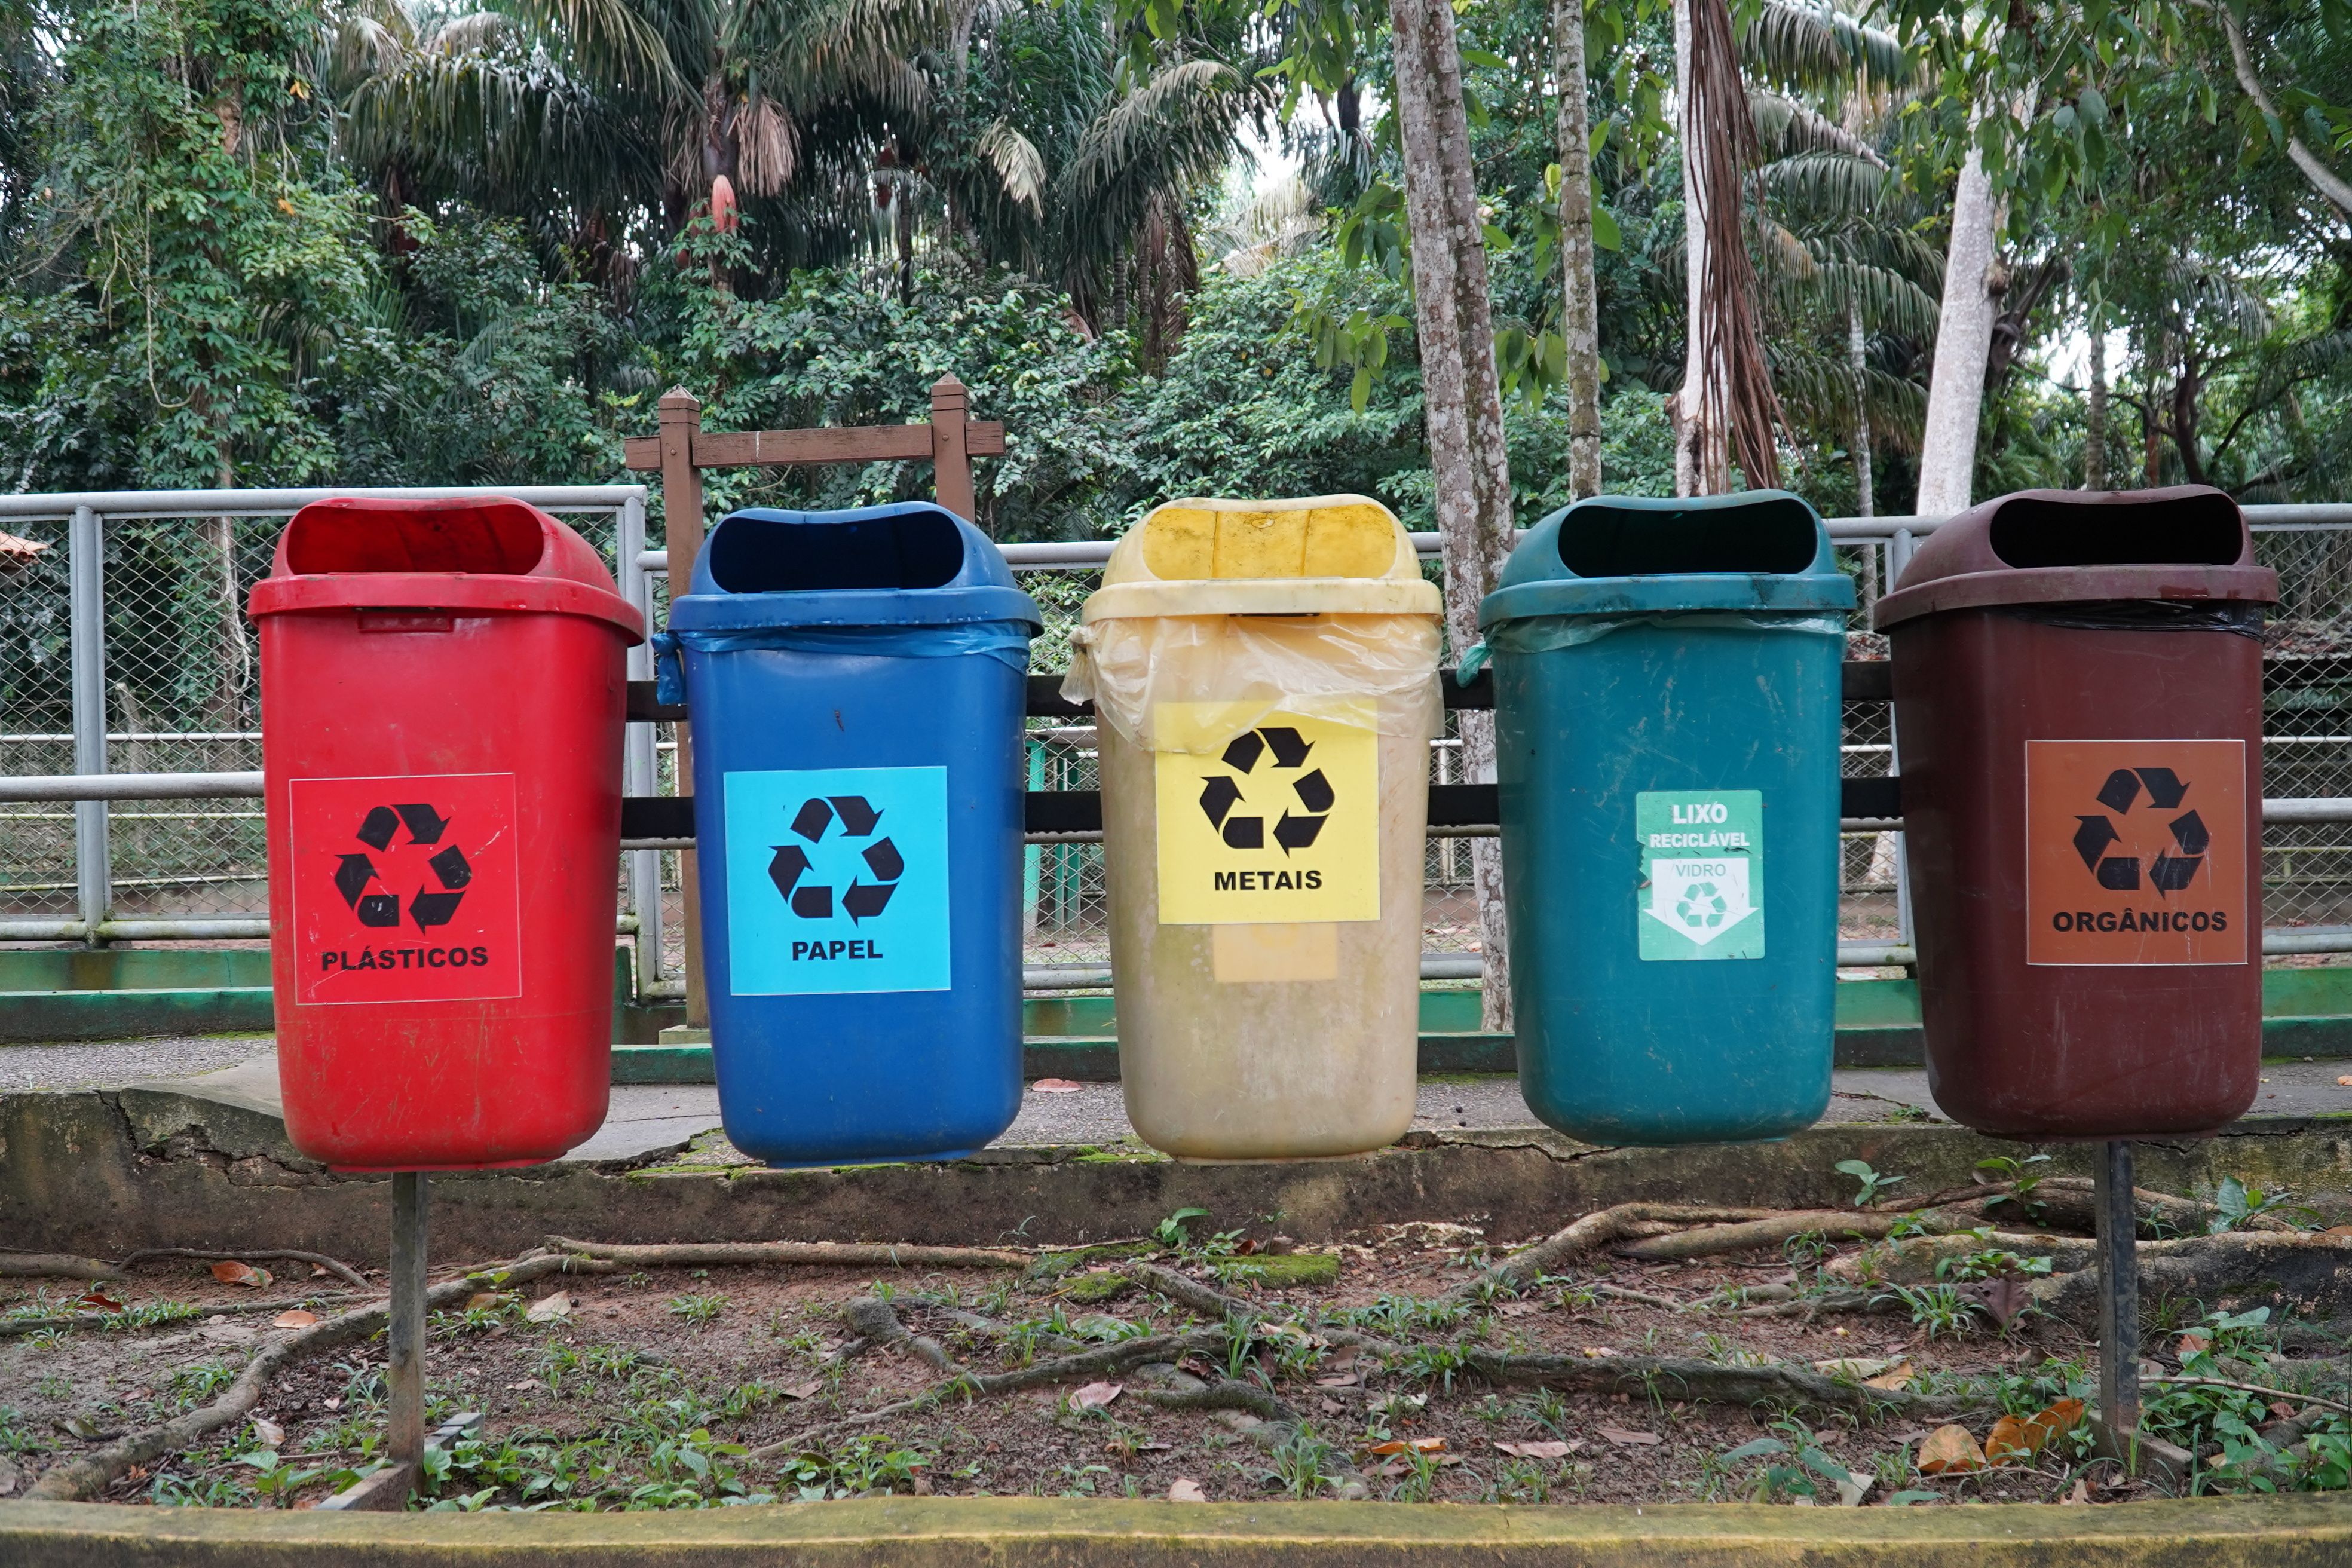 Recycling bins for plastic, paper, metal, and organics in Manaus, Brazil.